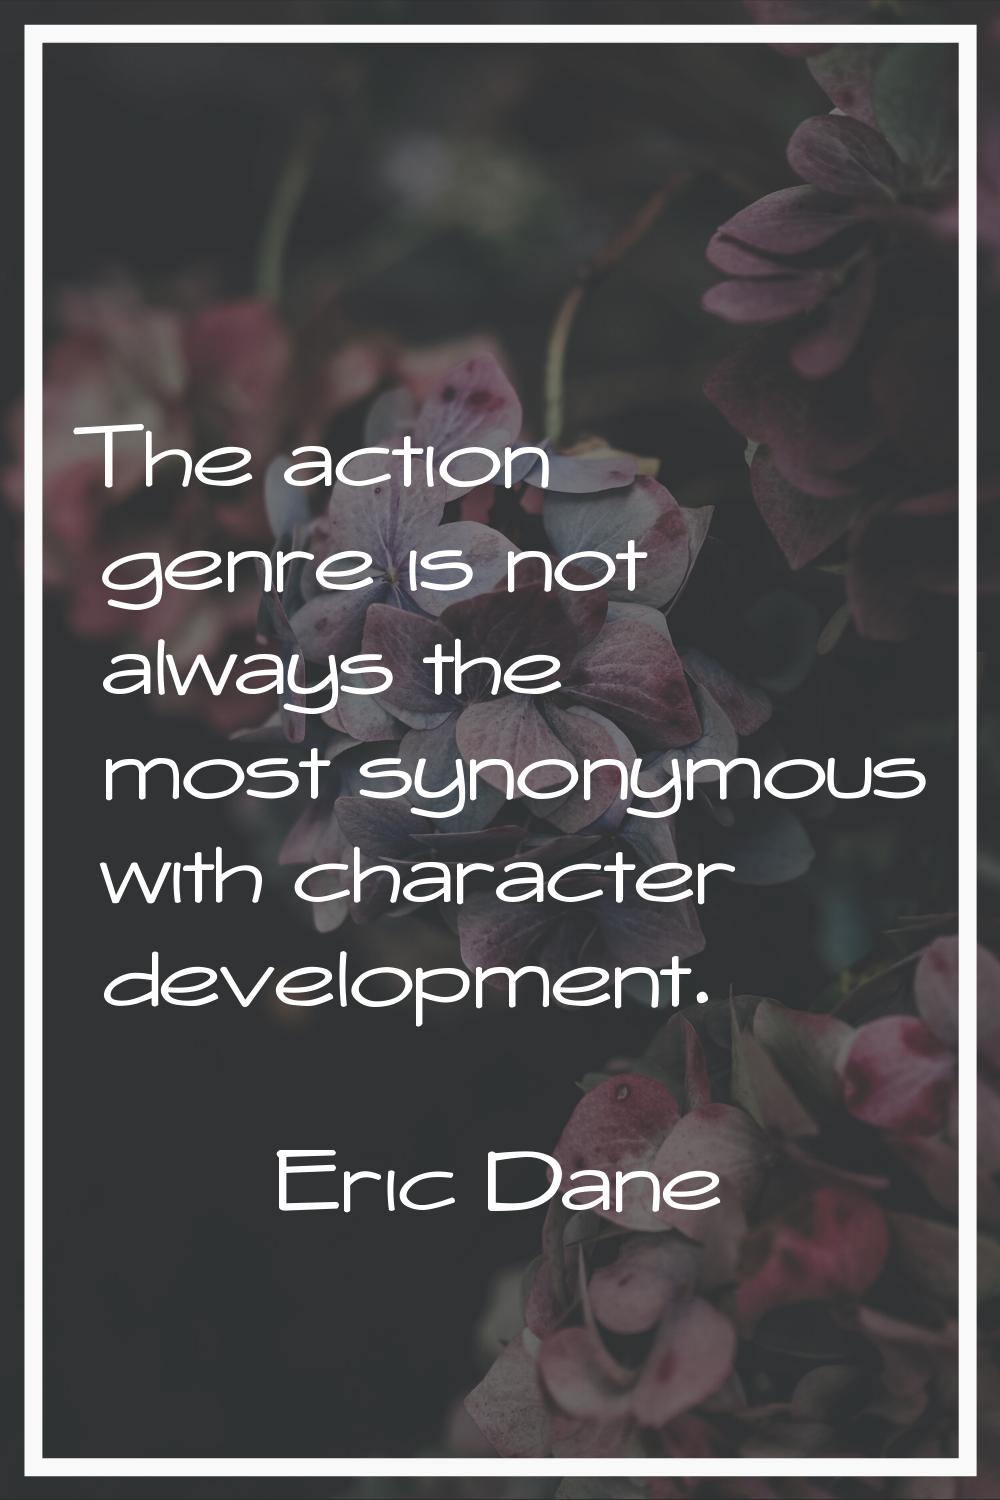 The action genre is not always the most synonymous with character development.